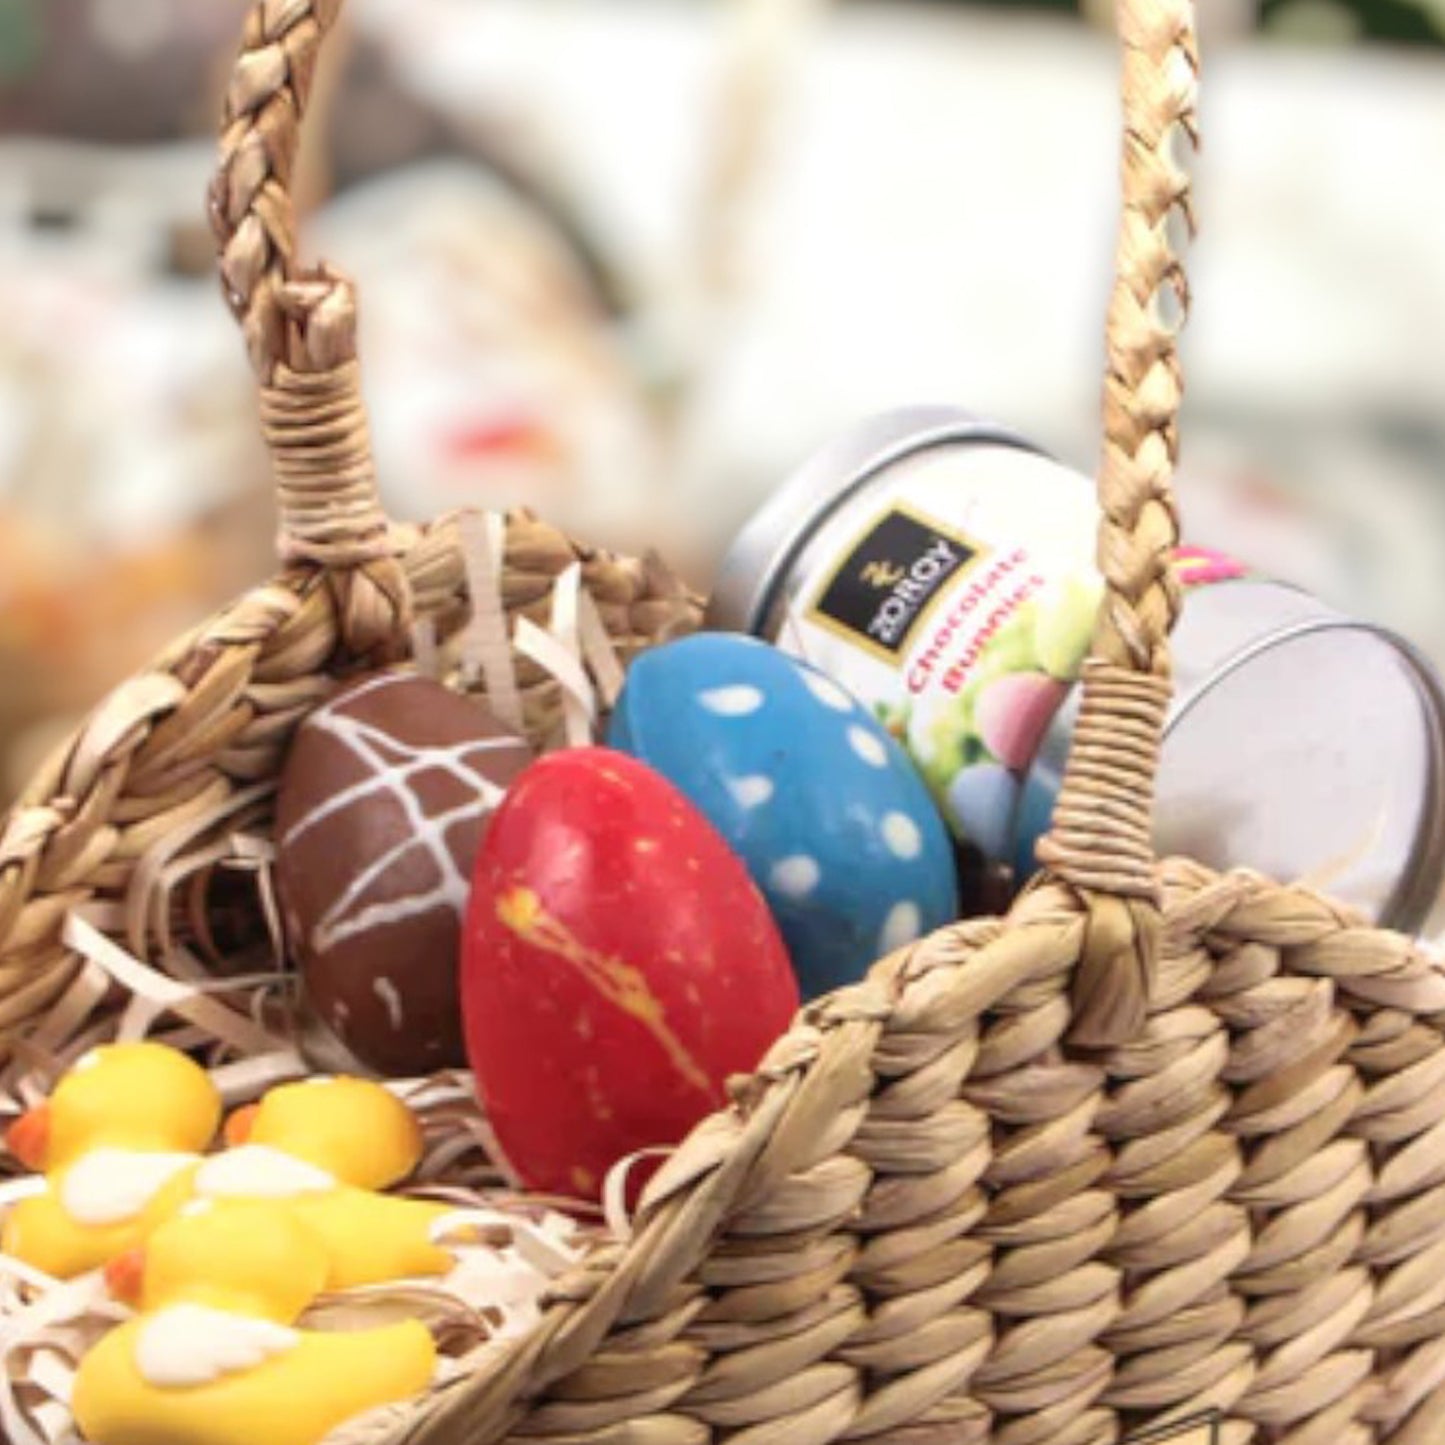 ZOROY Chocolate Natural Easter Basket of Happiness